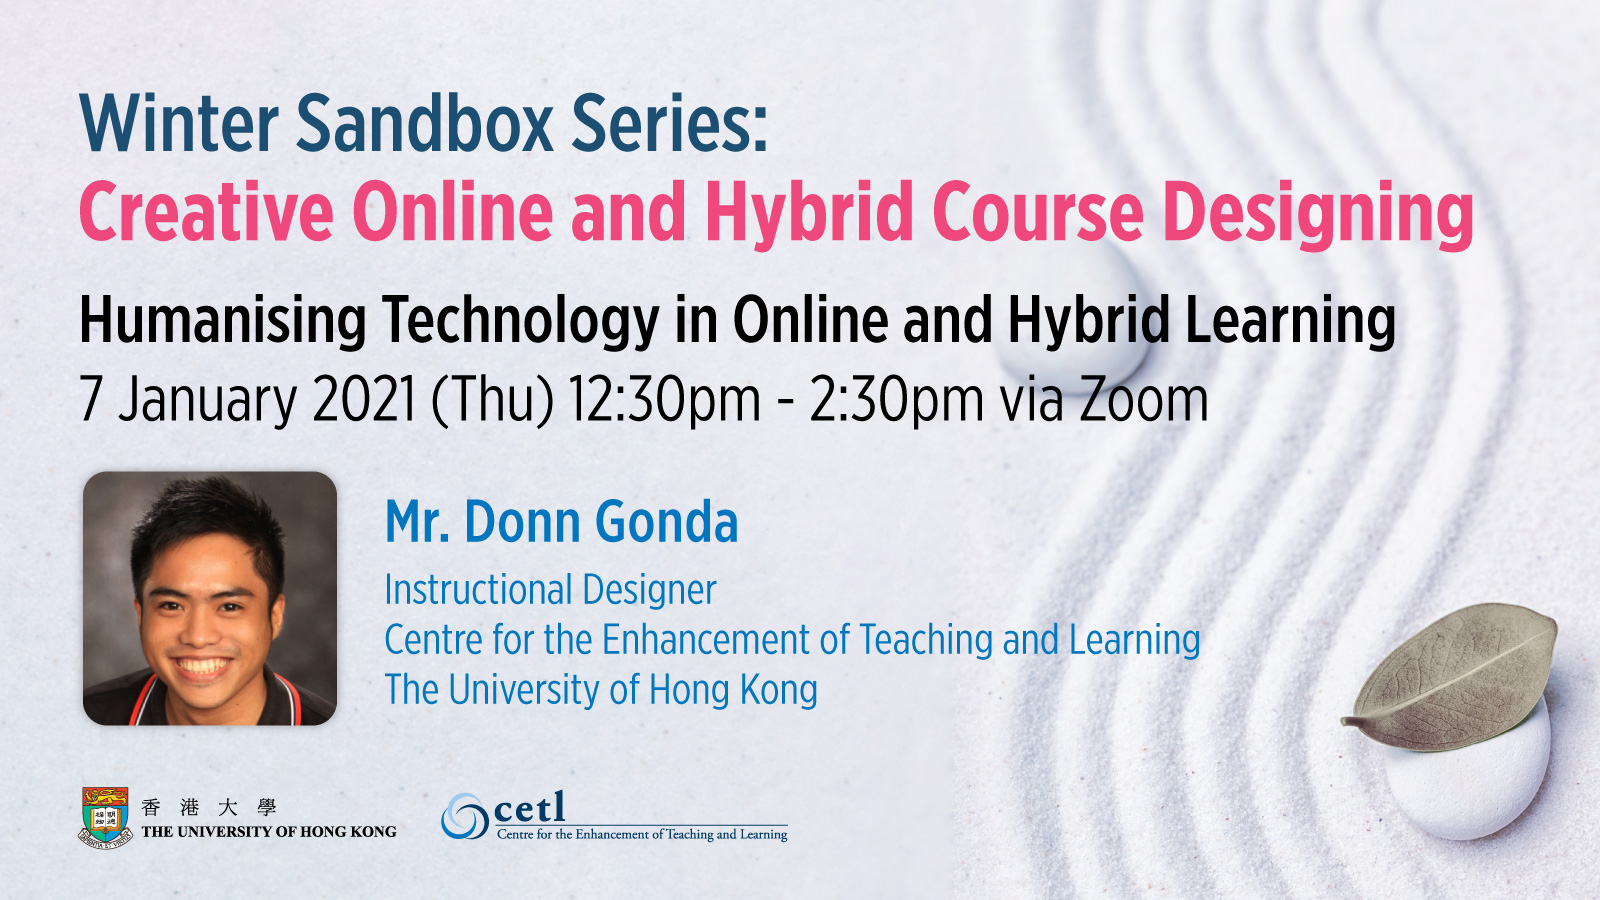 Session 3:  Humanising Technology in Online and Hybrid Learning